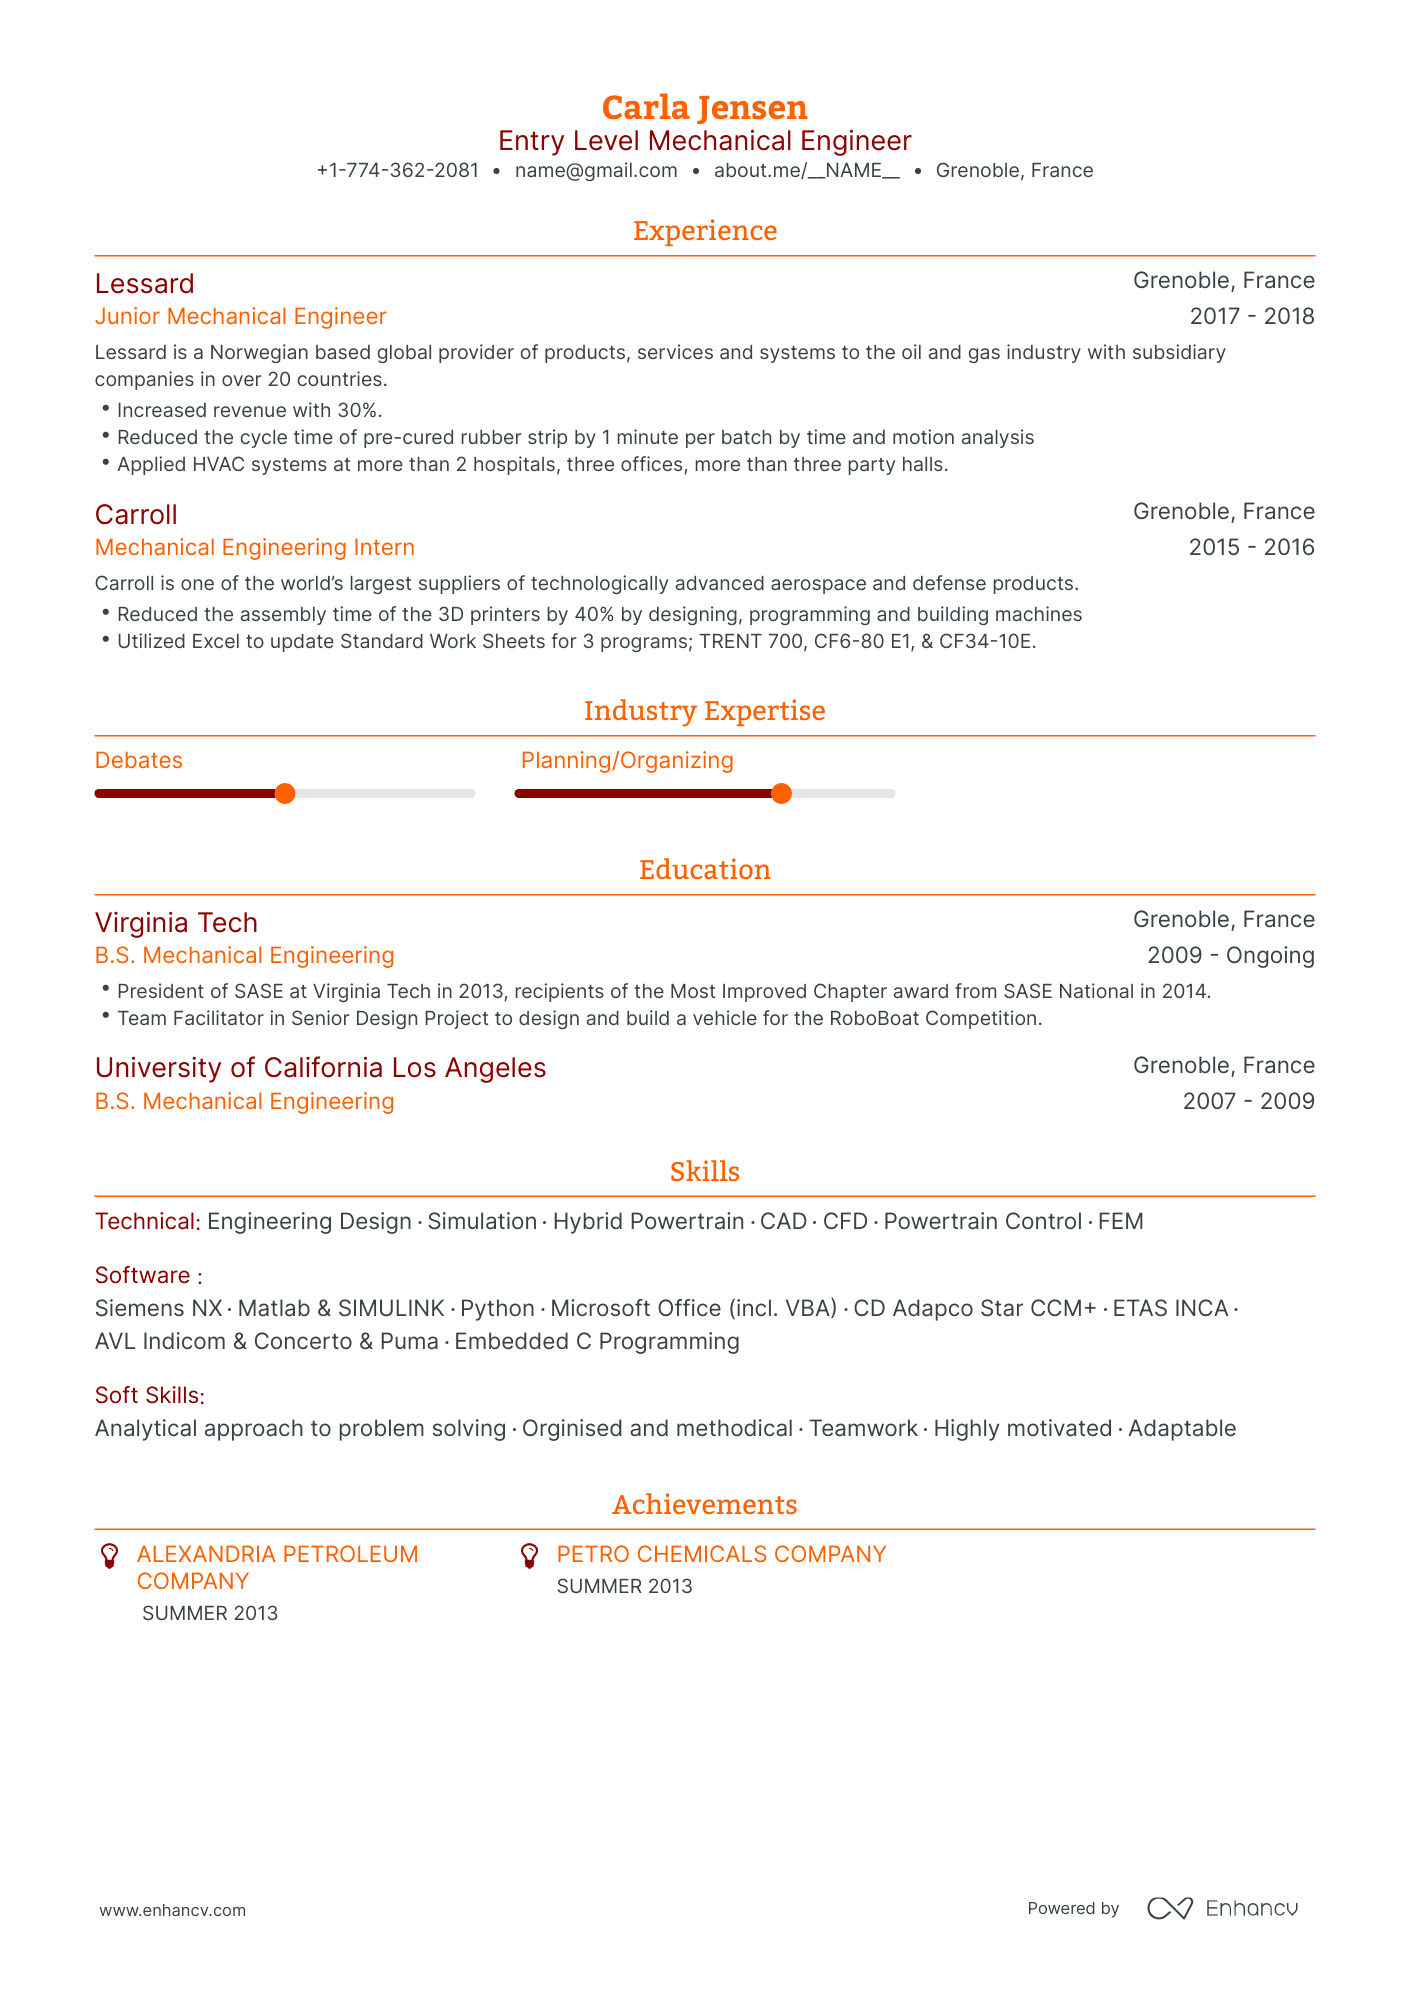 Traditional Entry Level Mechanical Engineer Resume Template